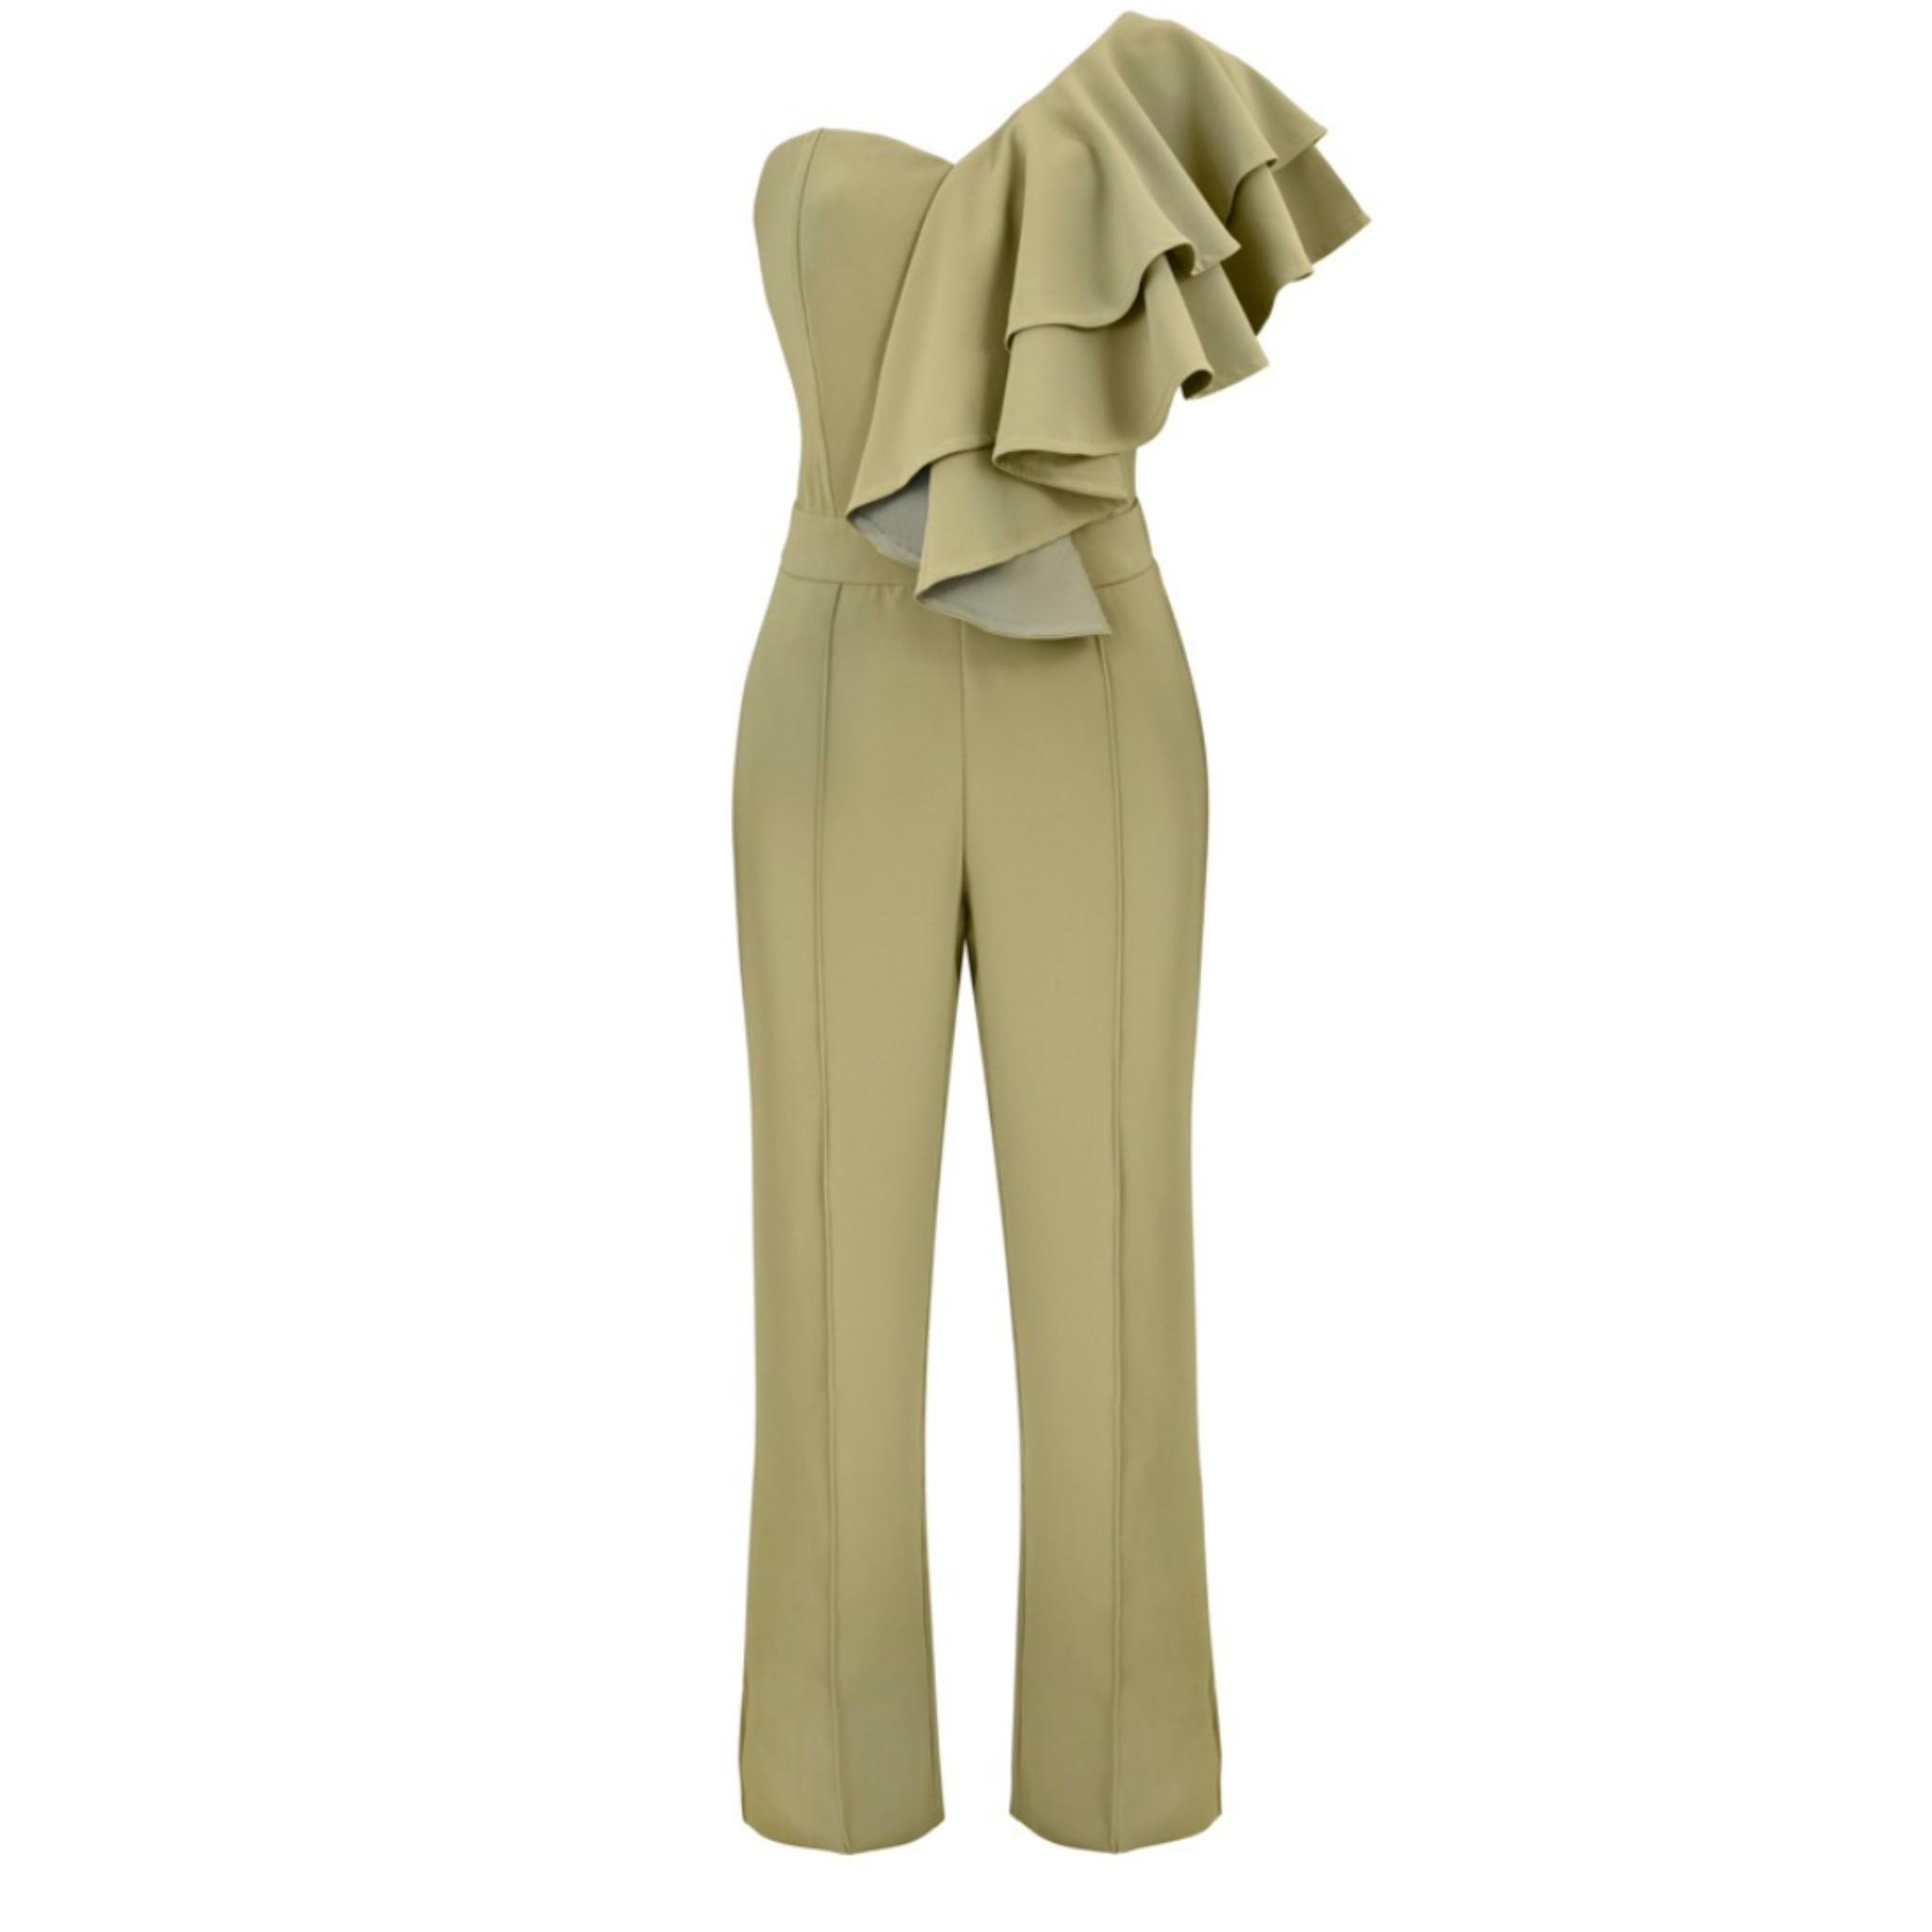 Sage green one-shoulder ruffle jumpsuit with cigarette trousers. This stunning jumpsuit features a single shoulder design with a ruffle detail, exuding elegance and femininity. The sleek cigarette trousers complete the chic look, perfect for a stylish and glamorous statement